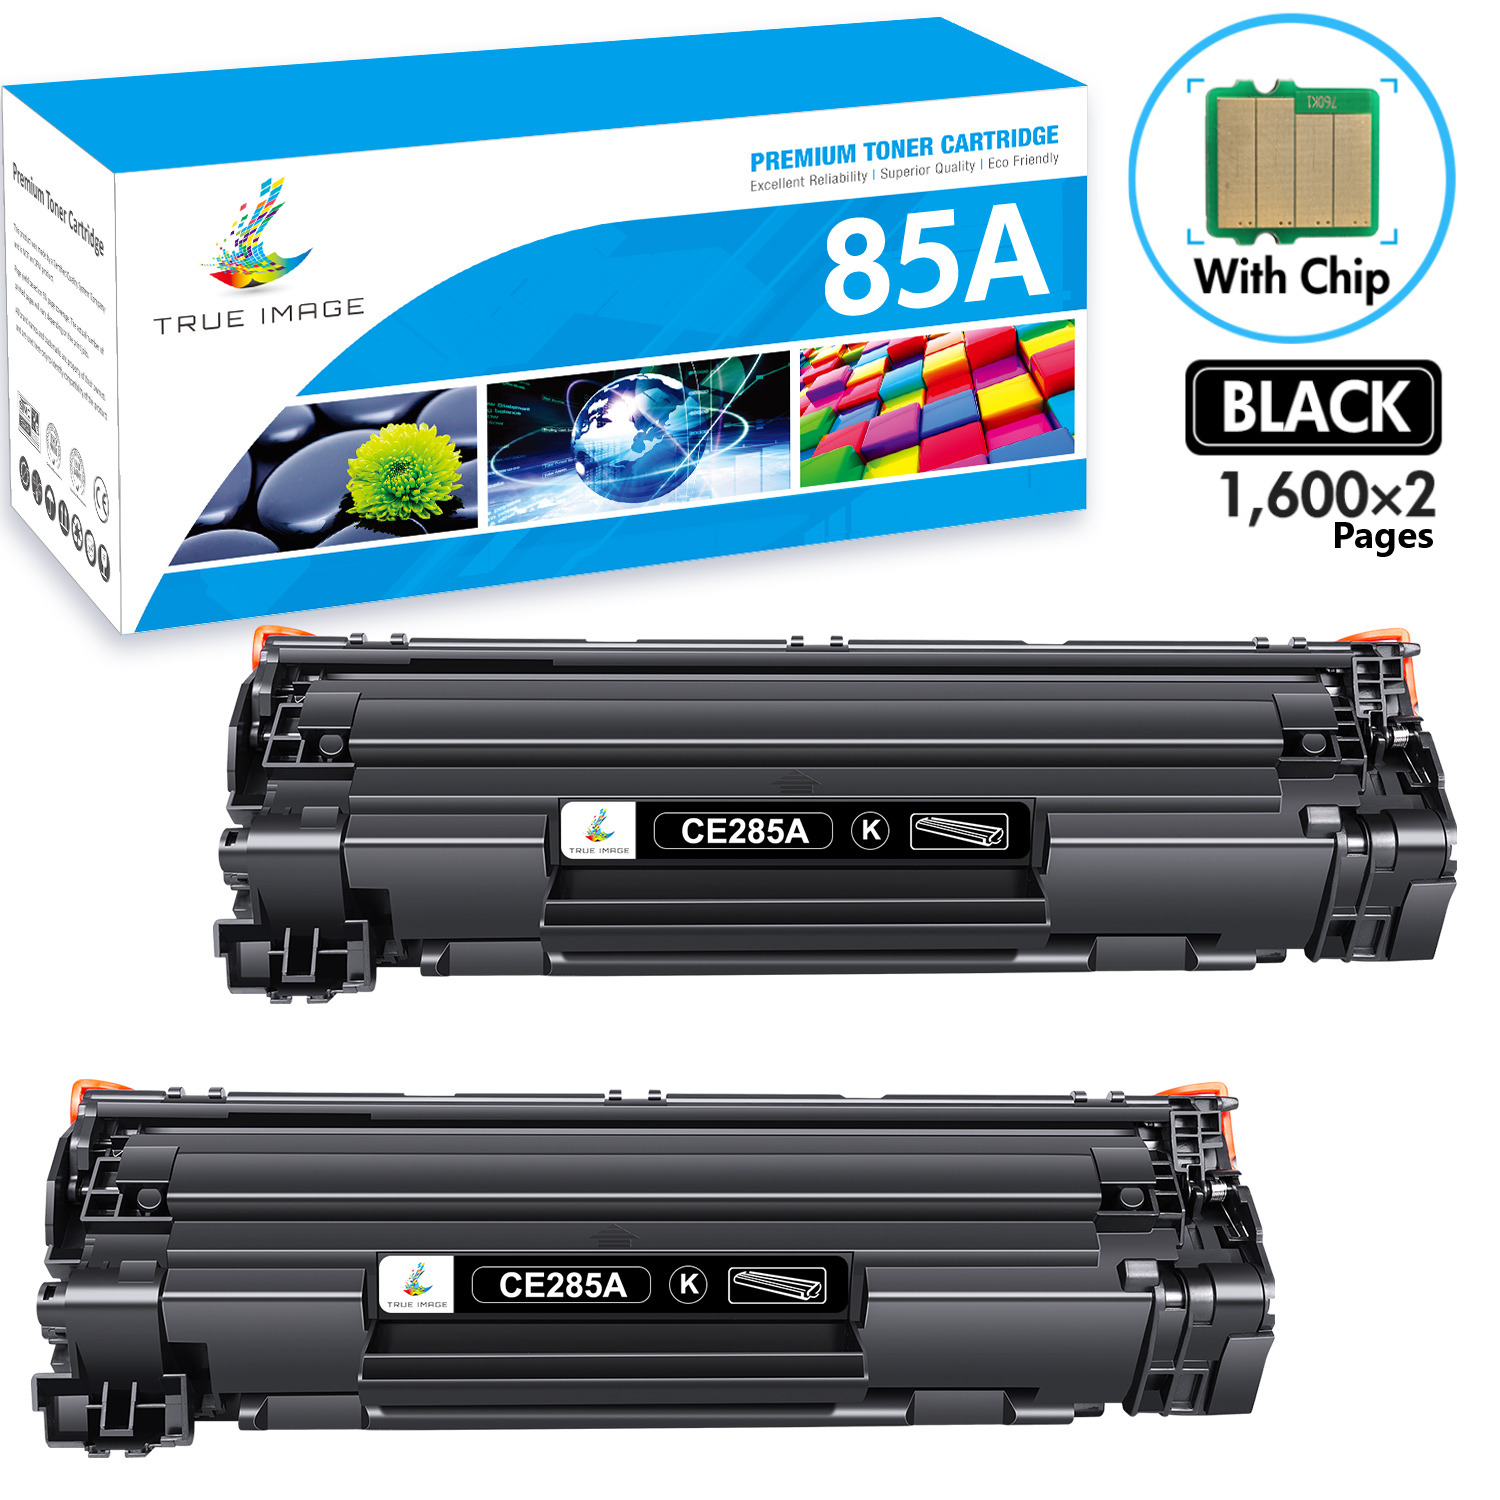 2PACK CE285A 85A Toner WITH CHIP For HP LaserJet P1006 Pro M1138 M1139 M1210